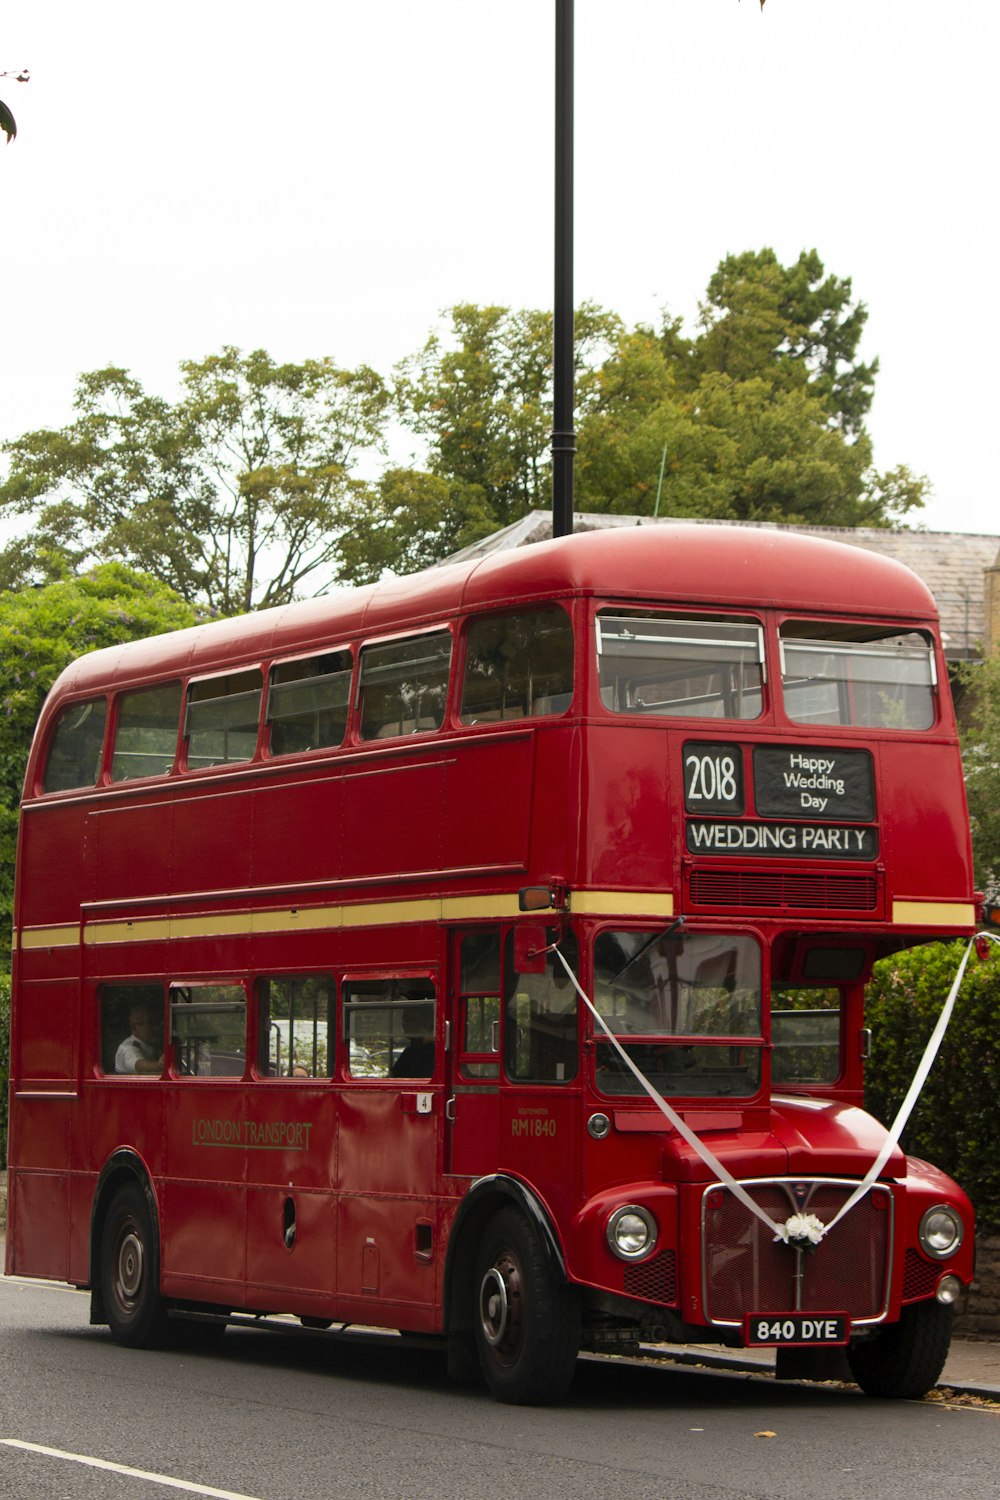 red Wedding Party double decker bus on road near trees and house